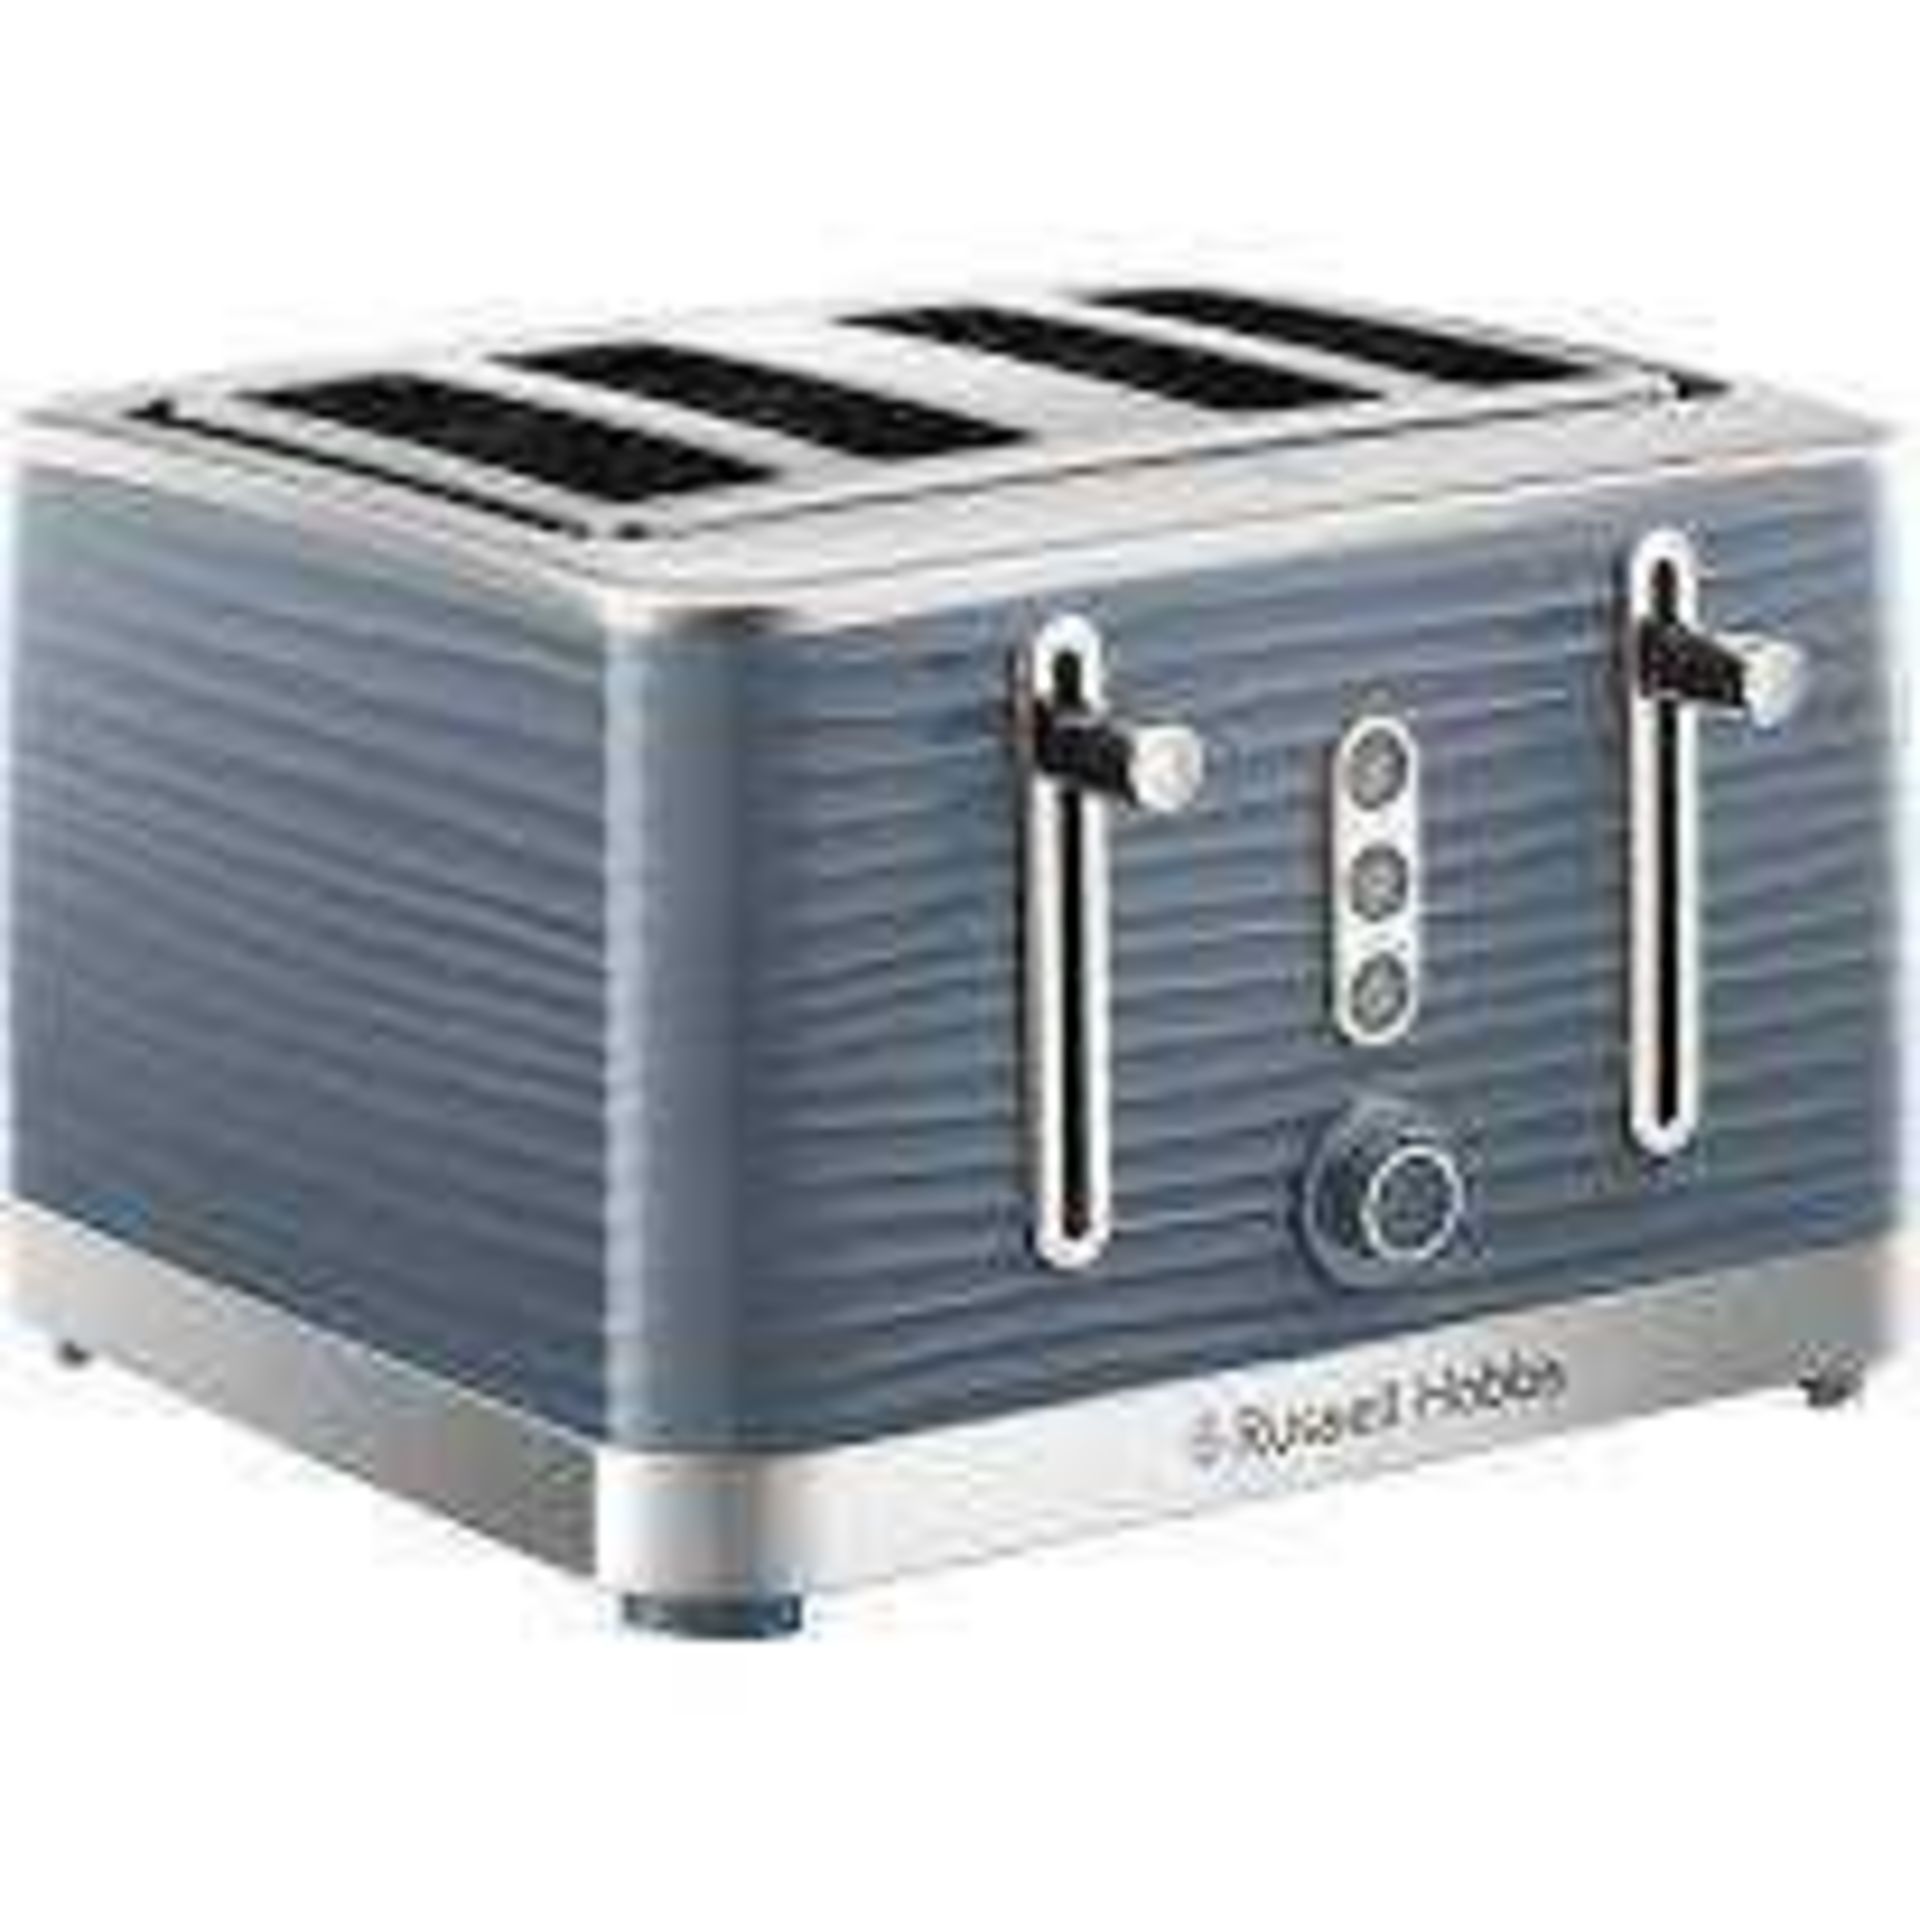 RRP £40 To £50 Each Boxed Assorted Russell Hobbs Kitchen Items To Include Legacy 4-Slice Toasters In